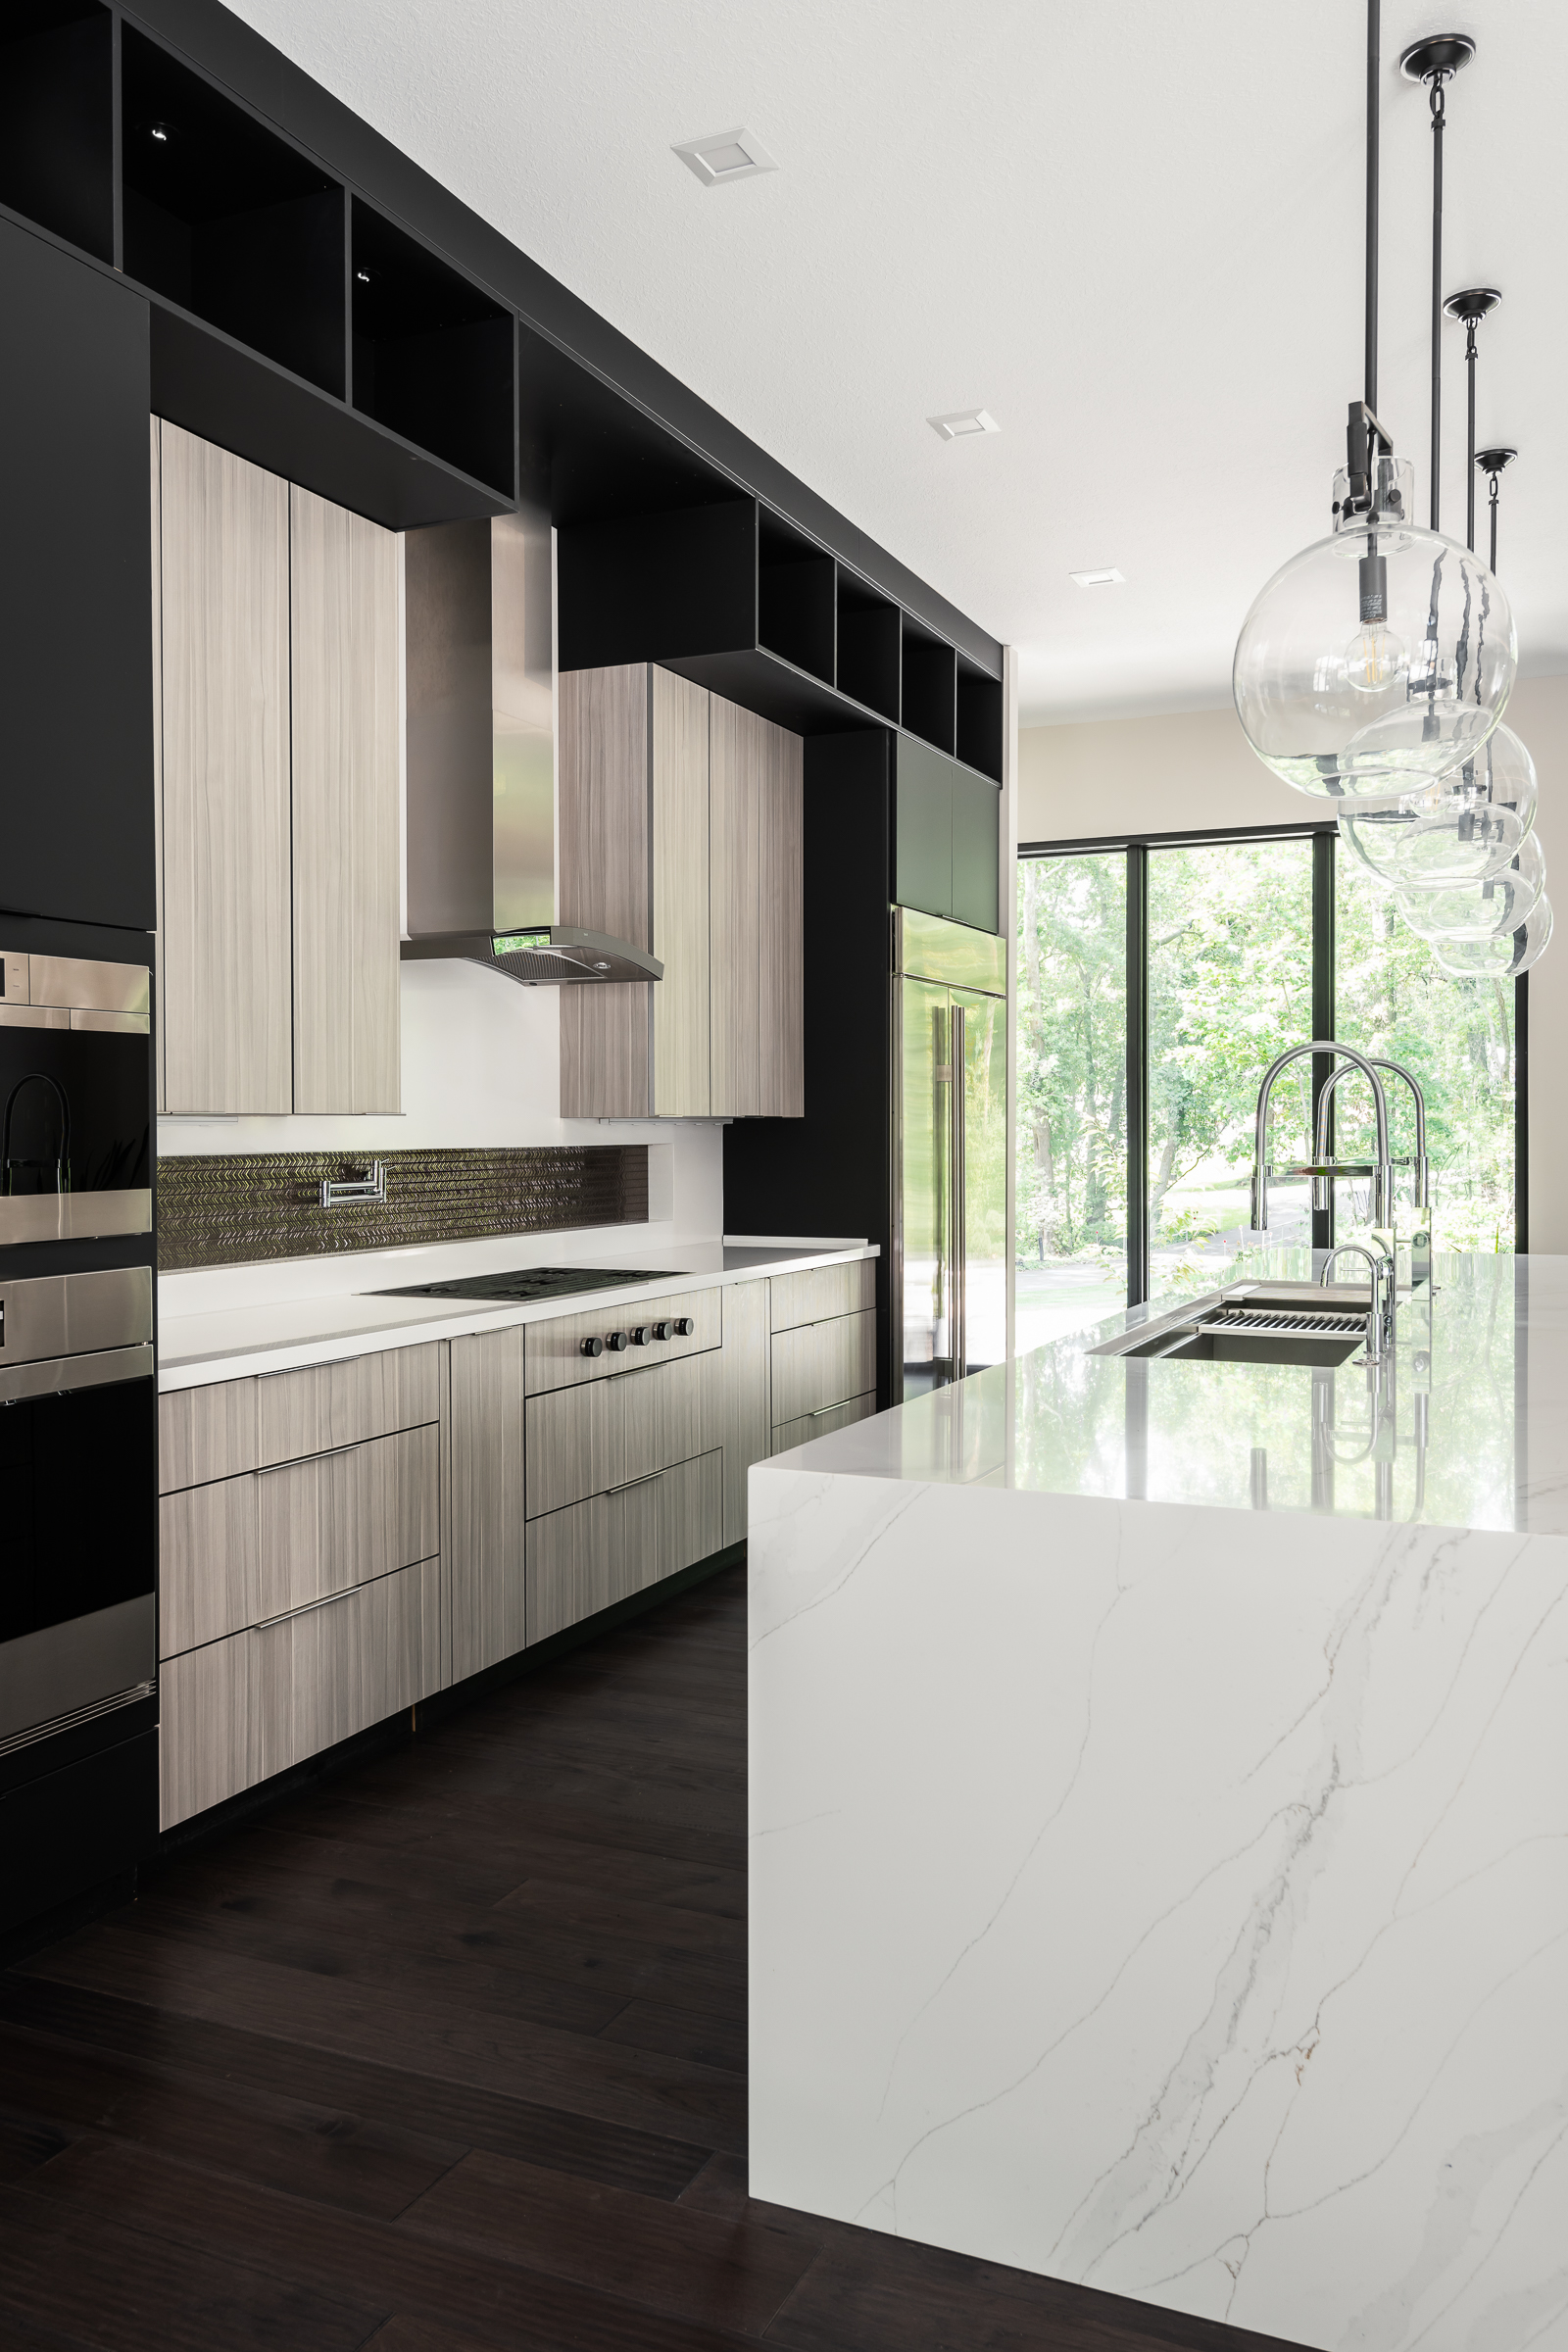 Modern details in this open concept kitchen include frameless cabinets, a waterfall top and concealed appliances